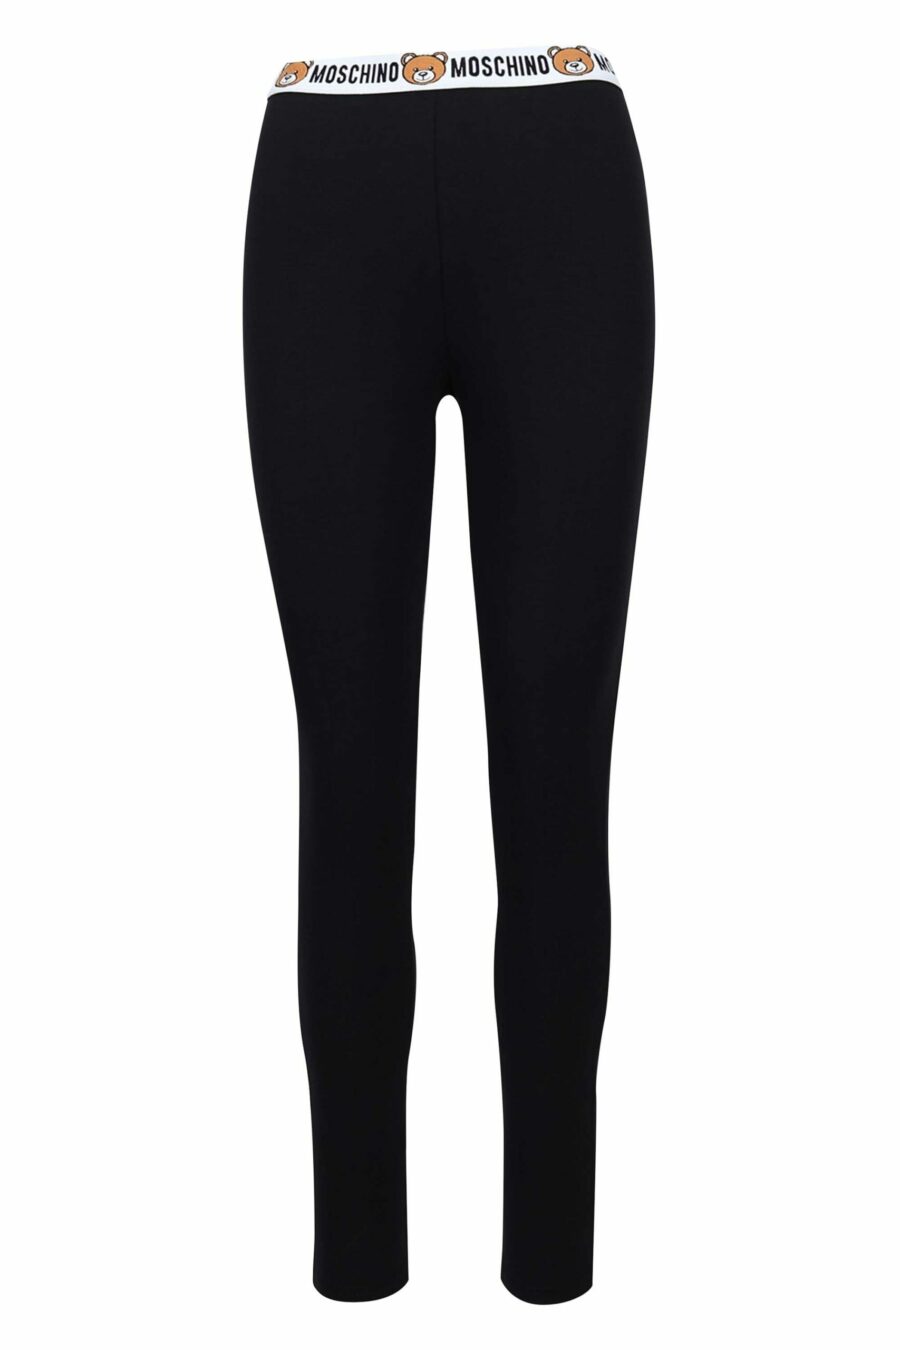 Tracksuit bottoms black with logo on waistband - 889316615418 scaled